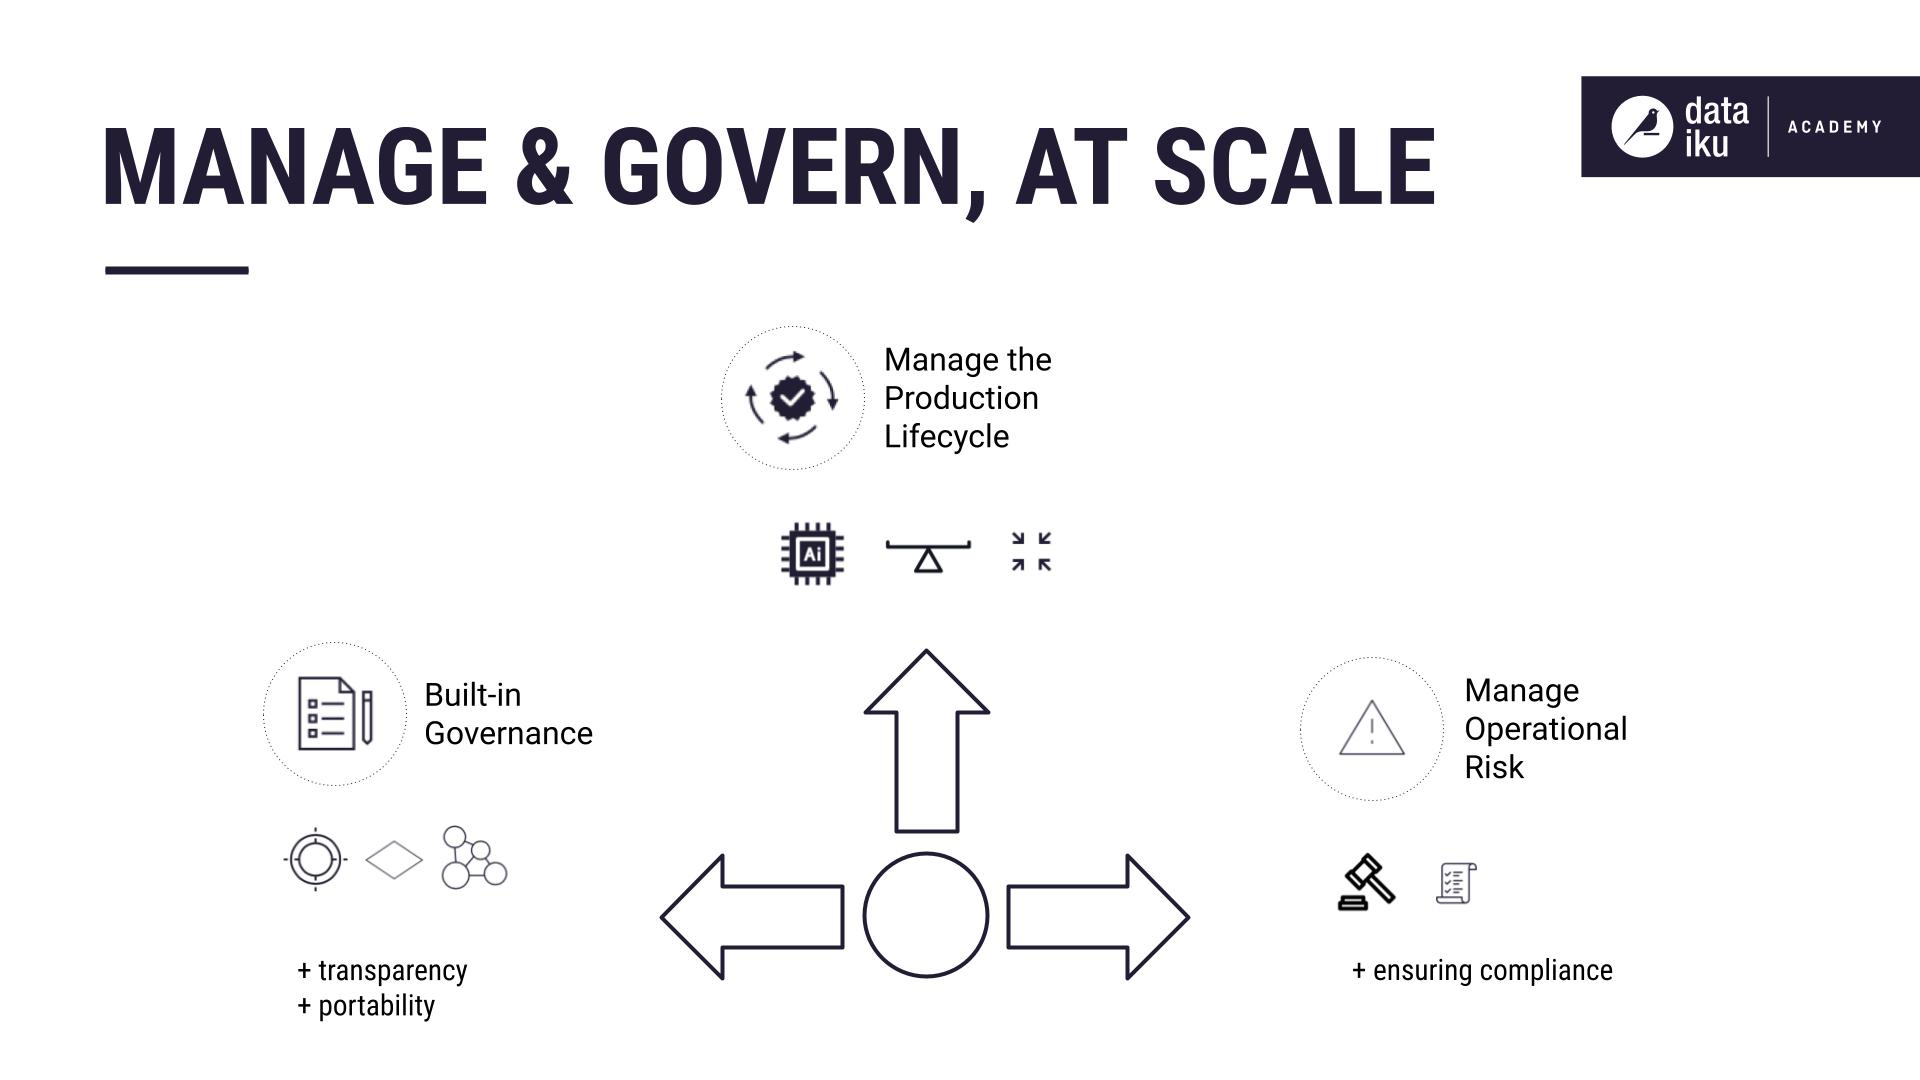 ../../_images/manage-govern-at-scale.png